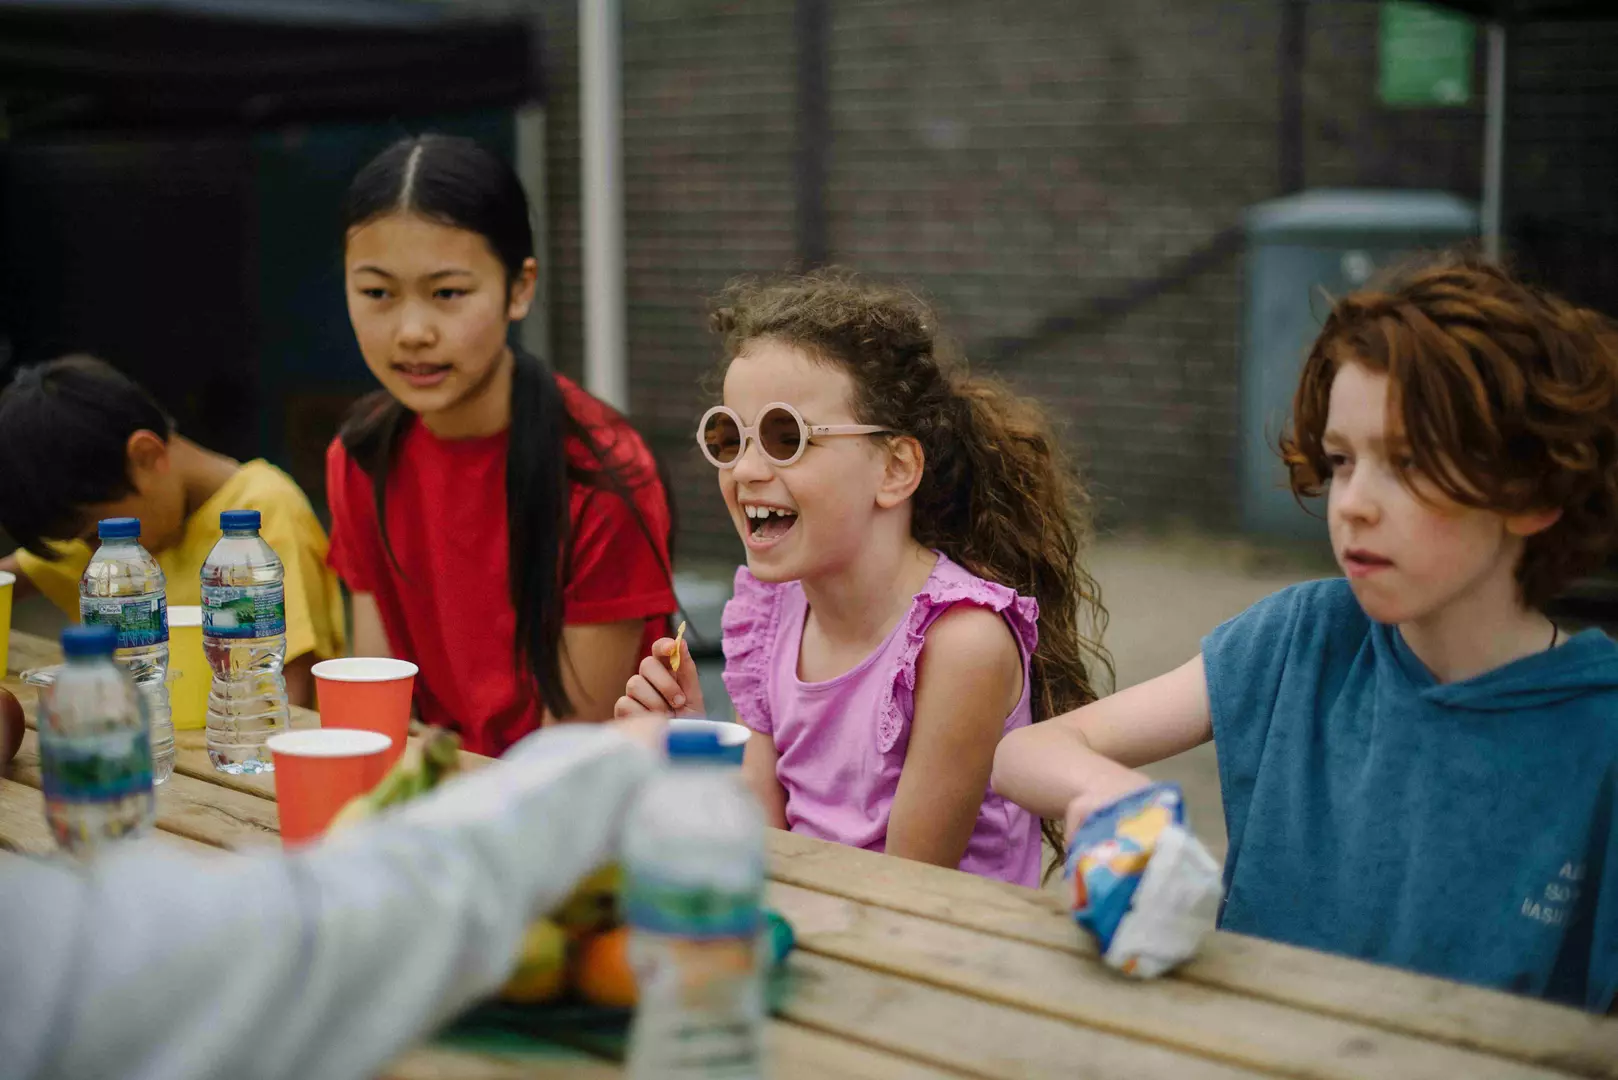 A group of primary school age children are eating luunch at a picnic table, the image is focused on one little girl with brown curly hair tied in a ponytail. She is wearing a purple t-shirt and pink heart shaped glasses. She's laughing and looking at someone off camera. 